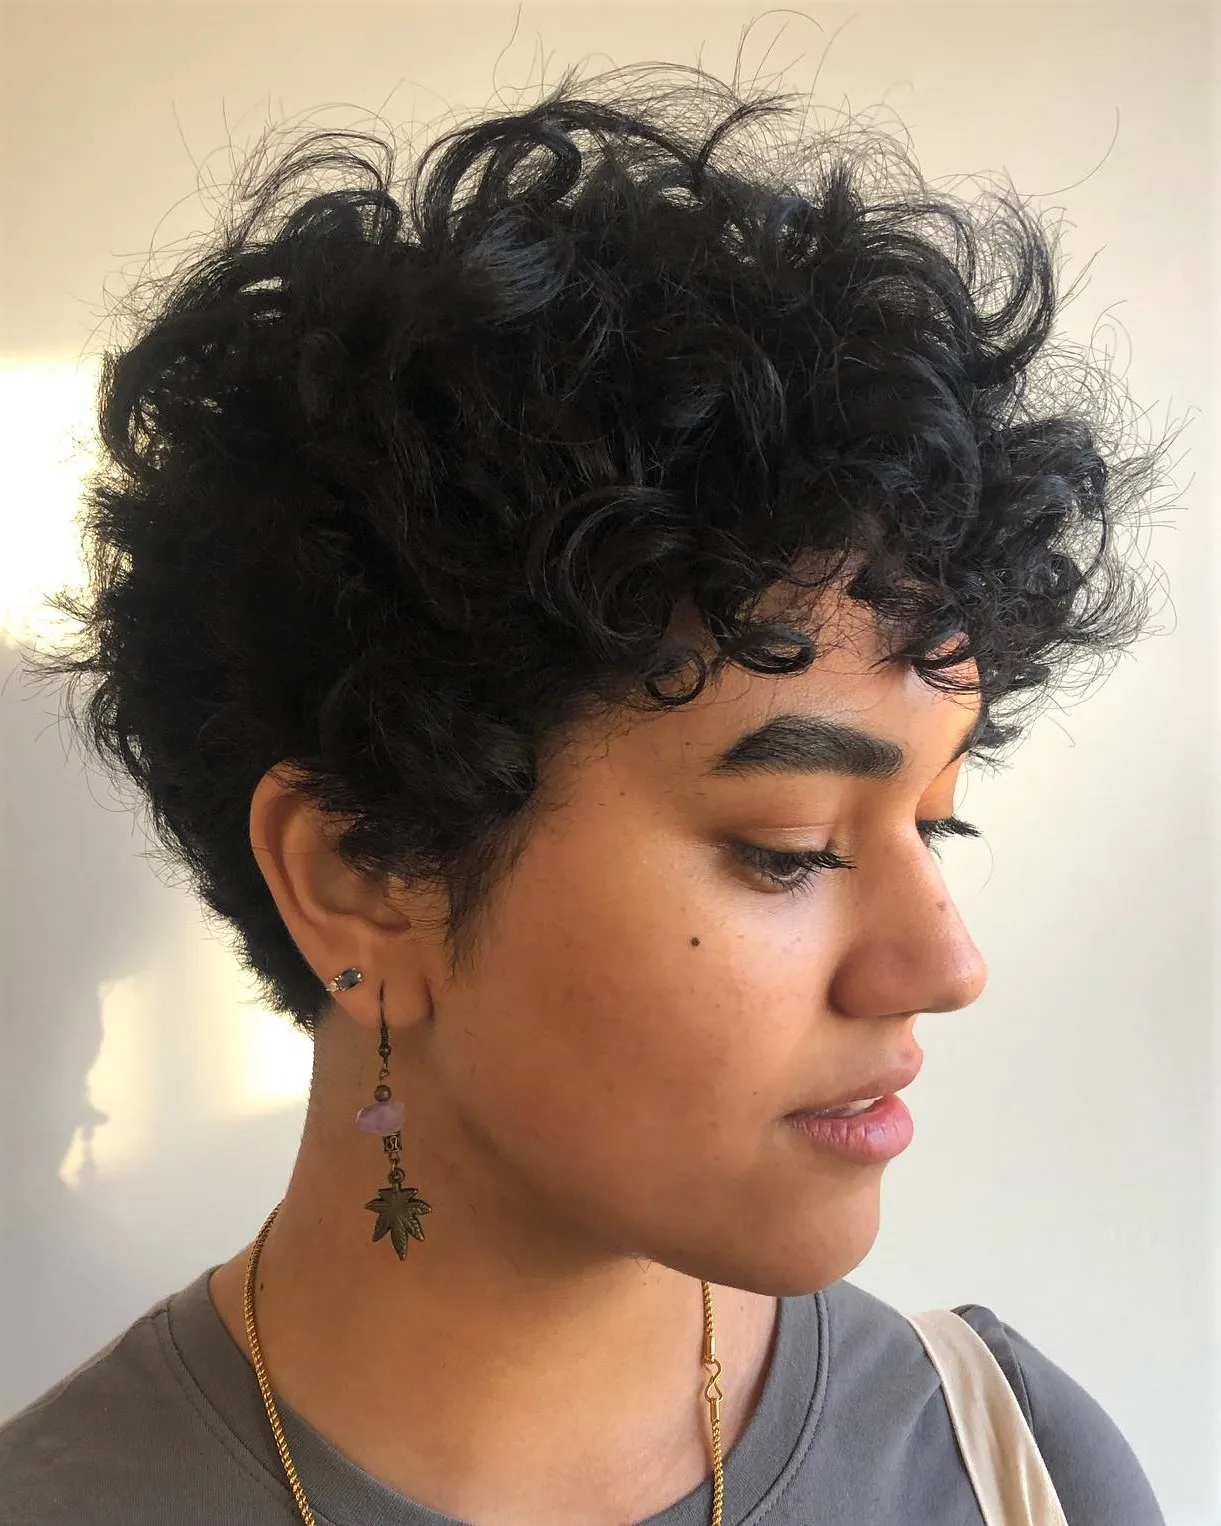 Shaggy, Short and Layered Curls